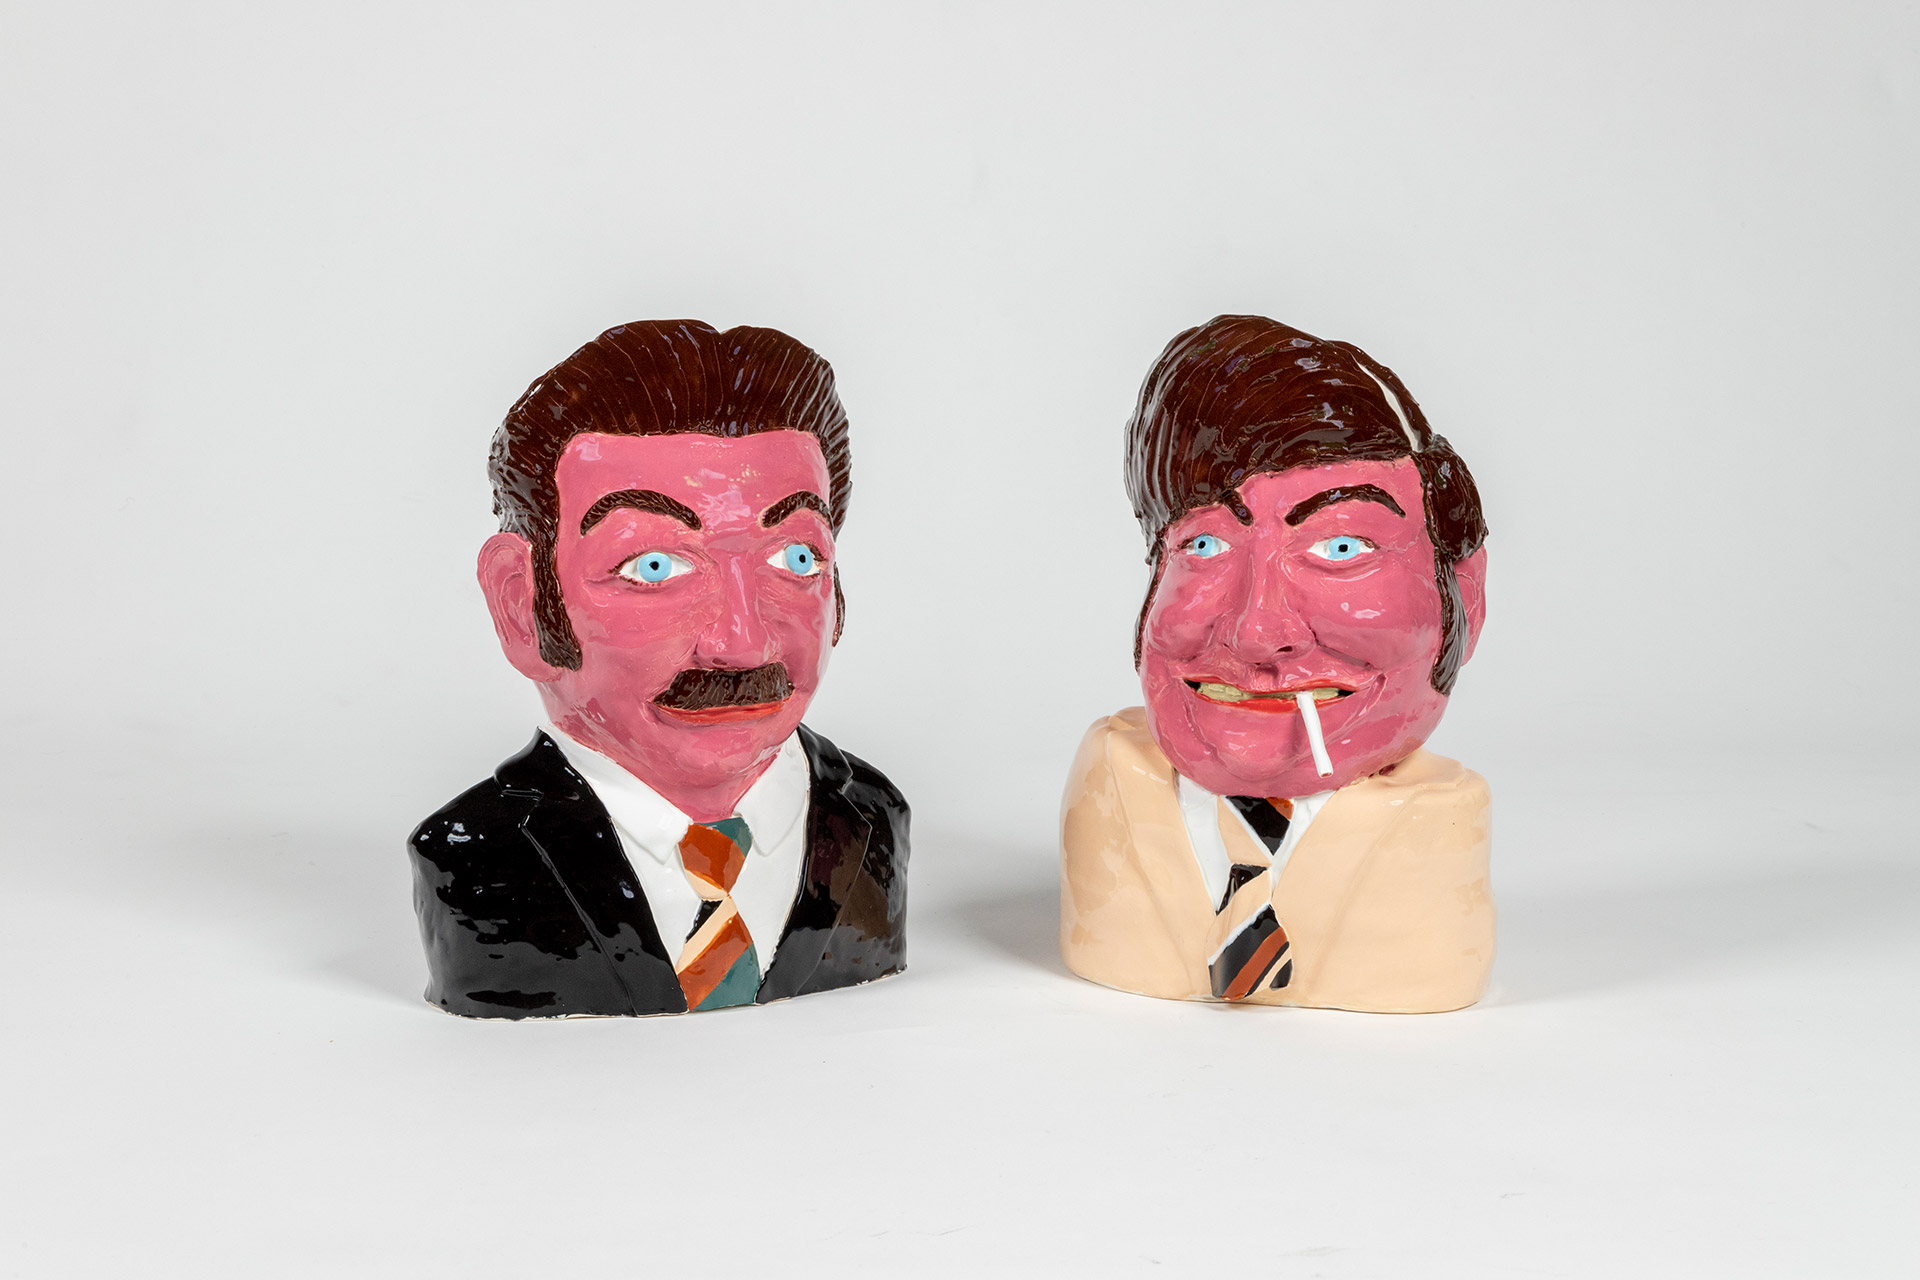 Sculpture of two ceramic heads by Paul Rayner.